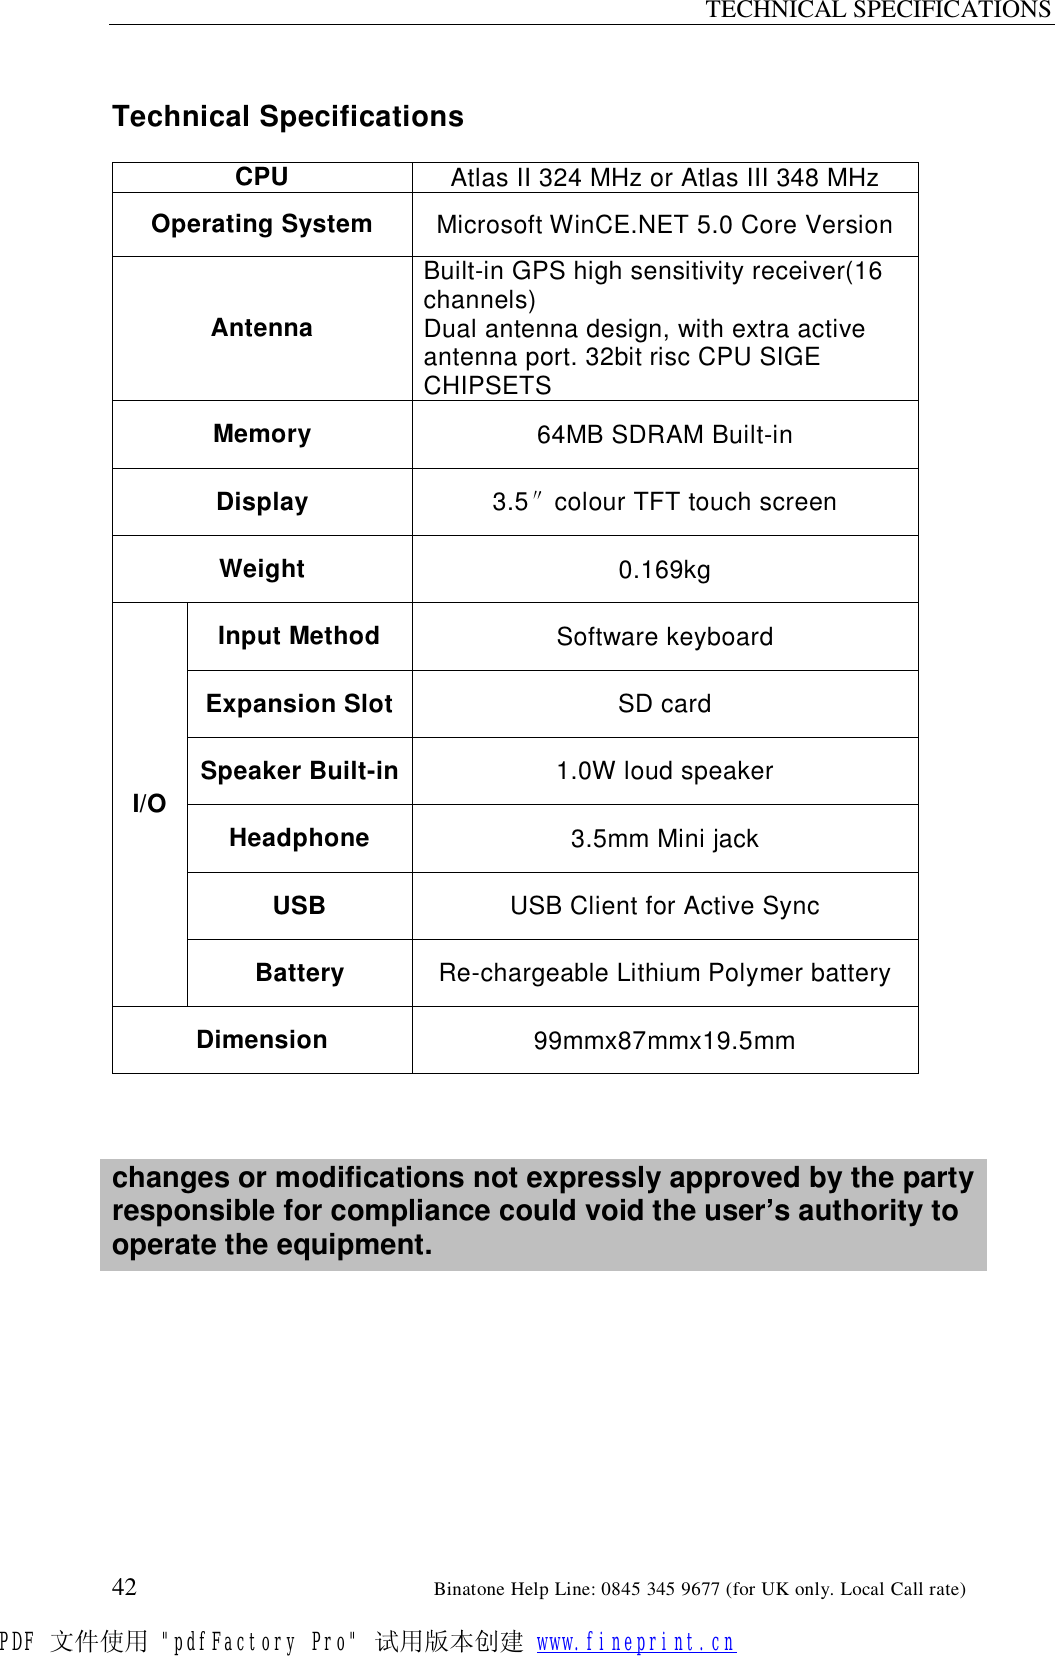 TECHNICAL SPECIFICATIONS  42                                                       Binatone Help Line: 0845 345 9677 (for UK only. Local Call rate)  Technical Specifications  CPU  Atlas II 324 MHz or Atlas III 348 MHz Operating System  Microsoft WinCE.NET 5.0 Core Version Antenna Built-in GPS high sensitivity receiver(16 channels)  Dual antenna design, with extra active antenna port. 32bit risc CPU SIGE CHIPSETS Memory  64MB SDRAM Built-in Display  3.5″colour TFT touch screen Weight  0.169kg Input Method  Software keyboard Expansion Slot SD card Speaker Built-in 1.0W loud speaker Headphone  3.5mm Mini jack USB  USB Client for Active Sync I/O Battery  Re-chargeable Lithium Polymer battery Dimension  99mmx87mmx19.5mm    changes or modifications not expressly approved by the party responsible for compliance could void the user’s authority to operate the equipment.         PDF 文件使用 &quot;pdfFactory Pro&quot; 试用版本创建 www.fineprint.cn